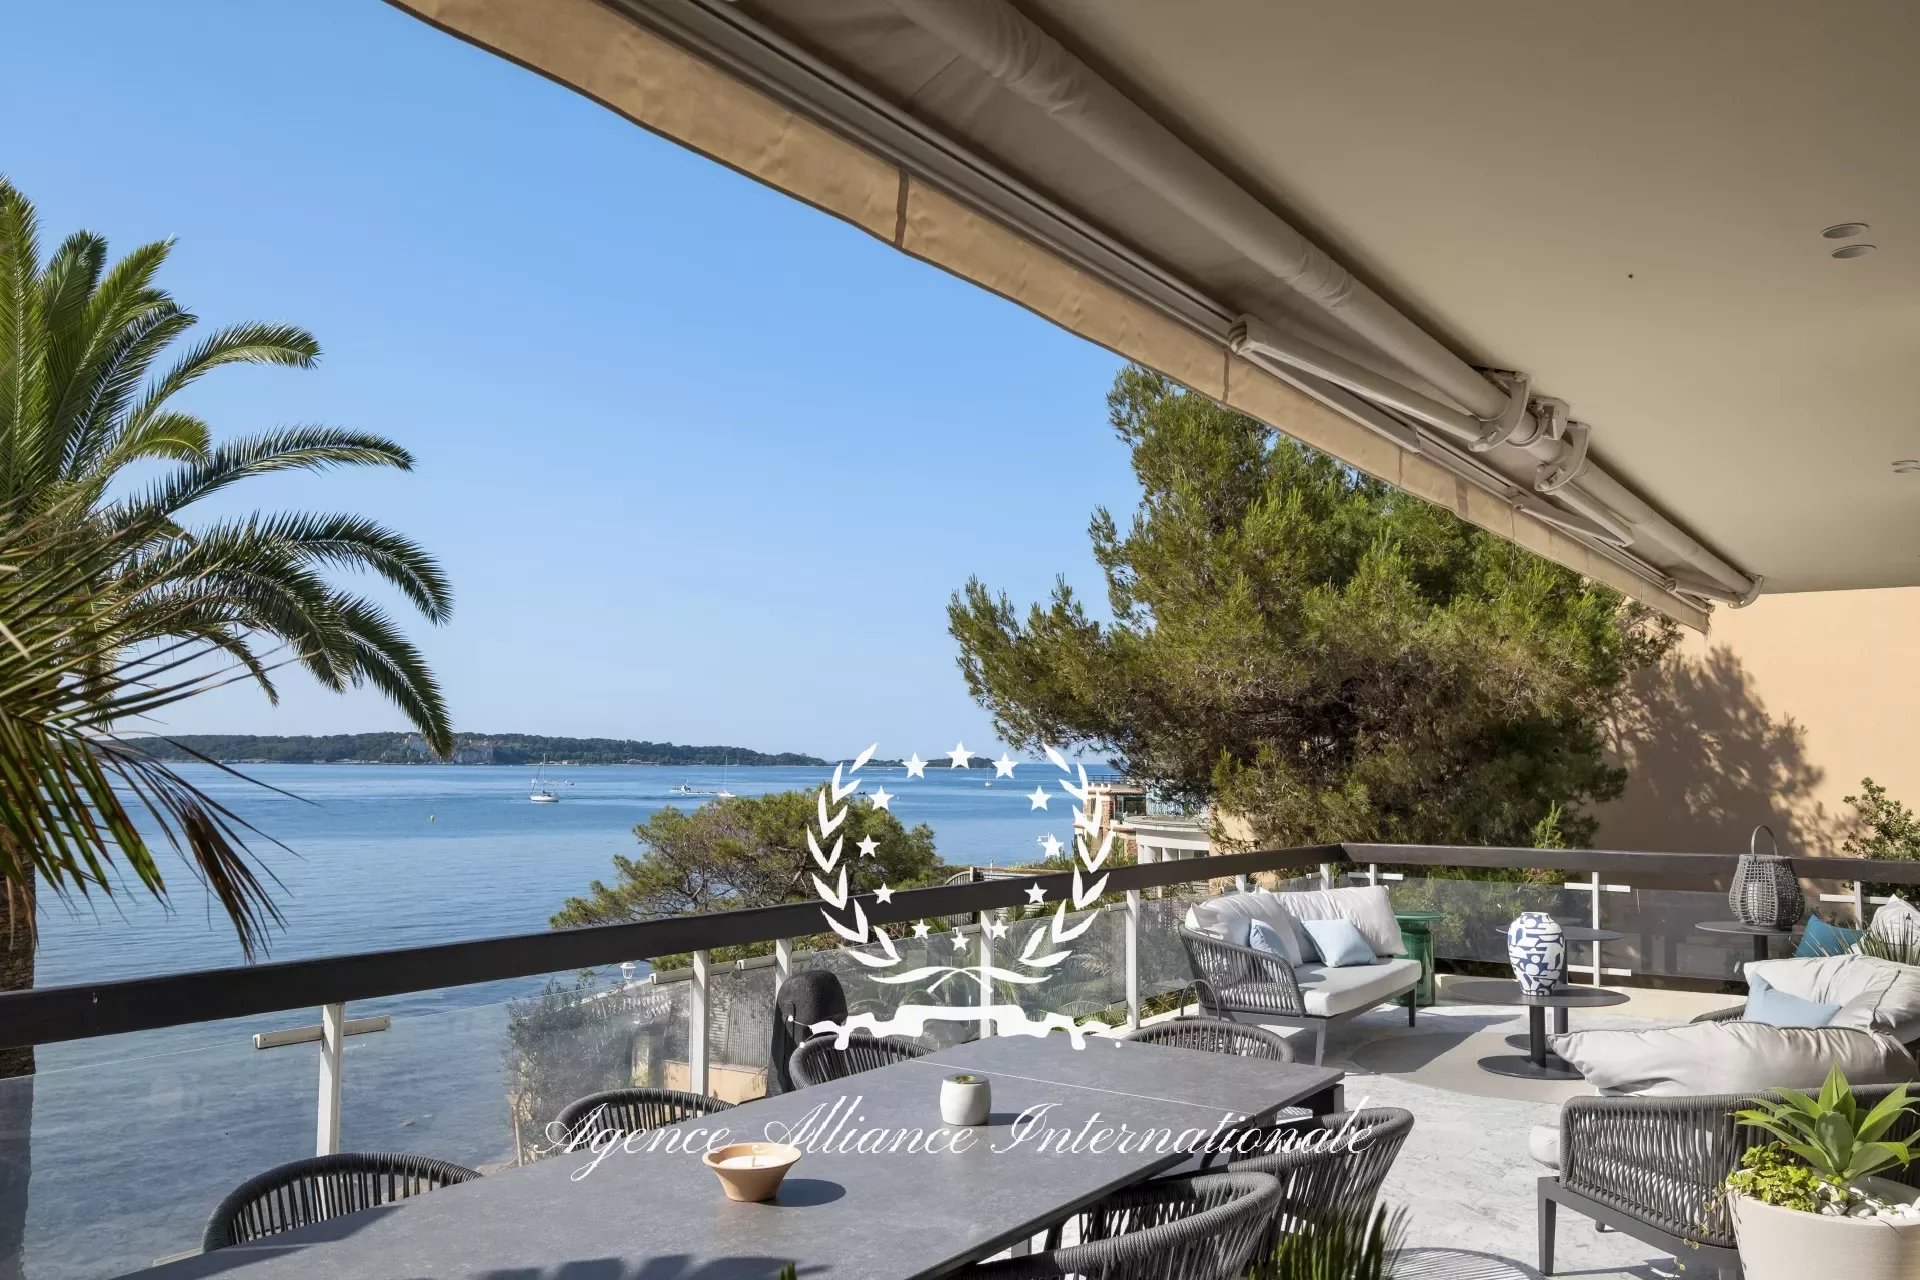 4-room penthouse Terrace sea view Cannes direct access to the beaches